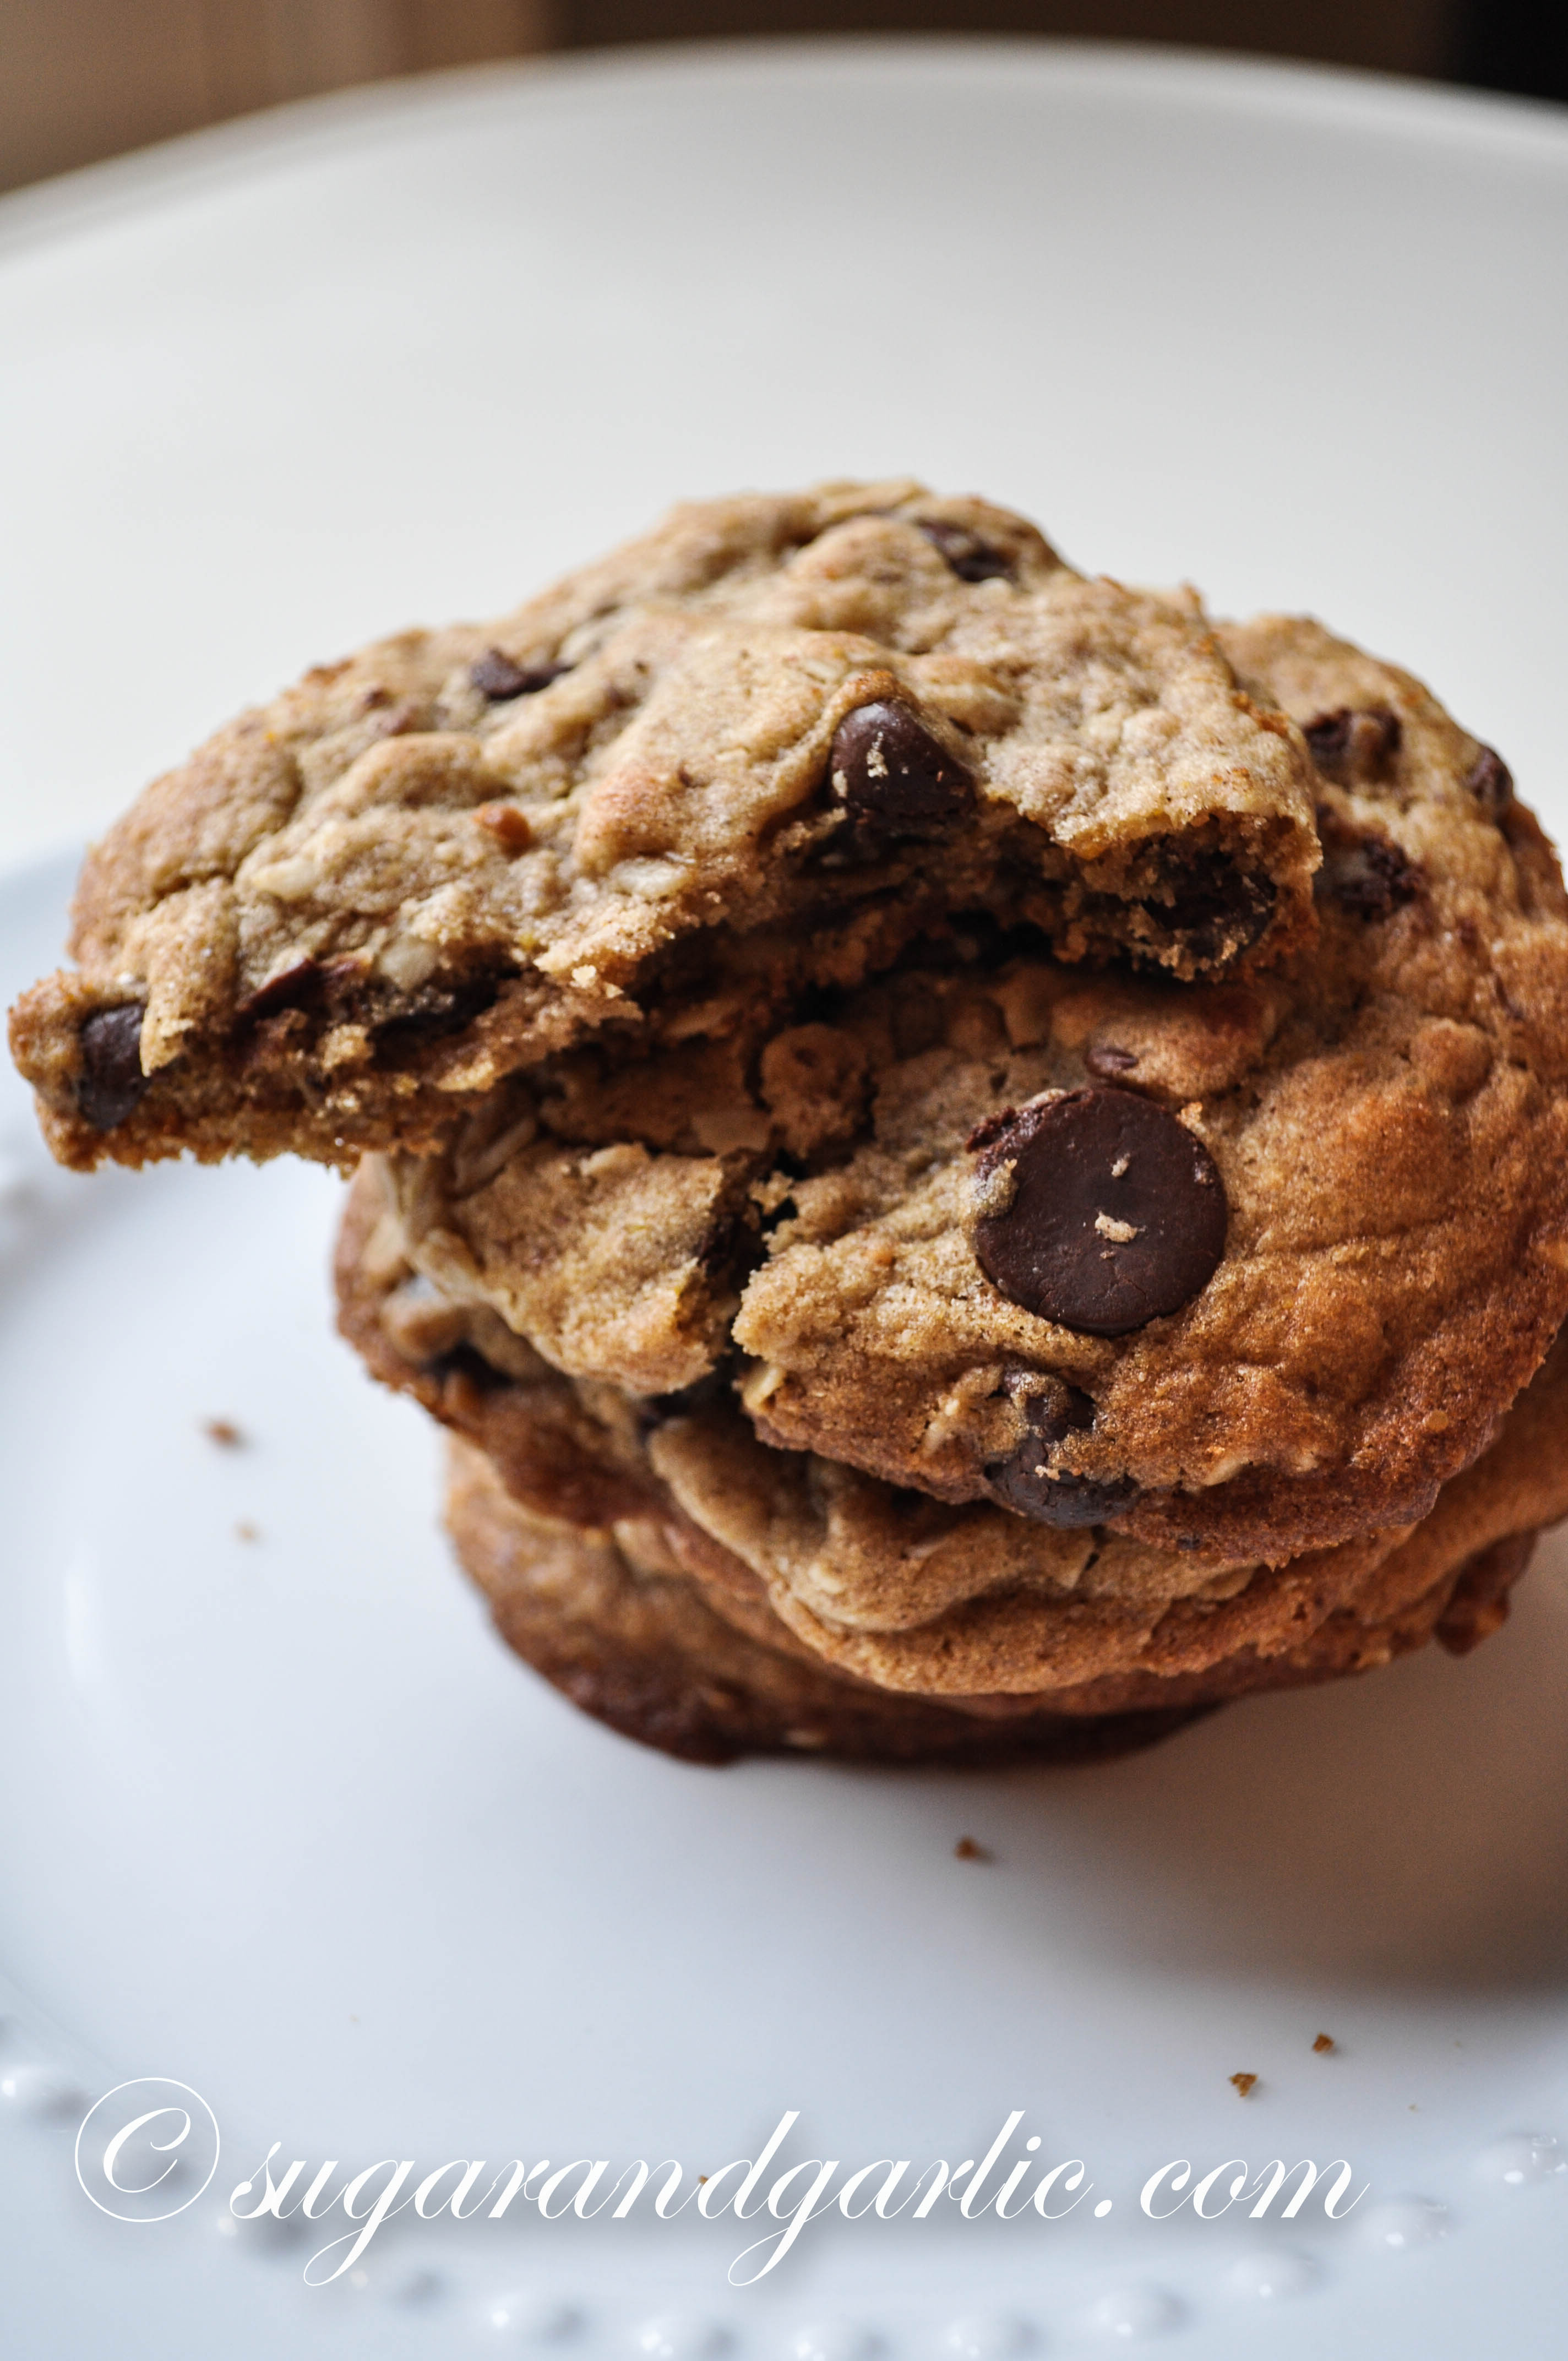 Magic Chocolate Chip Cookies (lactation cookies!)